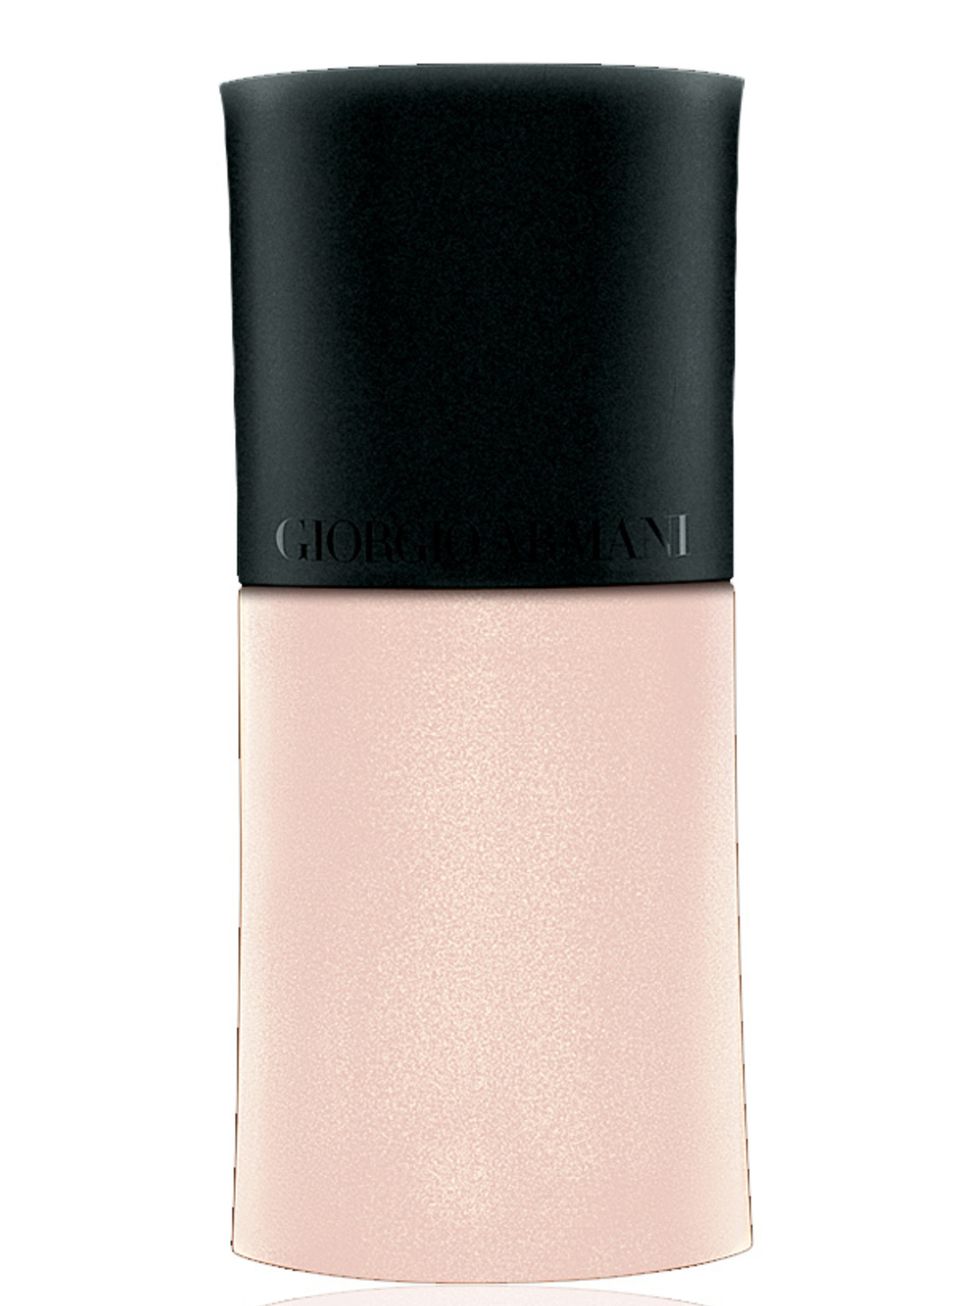 <p>Fluid Sheer, £28 by <a href="http://www.giorgioarmanibeauty.co.uk/_en/_gb/catalog/product.aspx?prdcode=A044&amp;catcode=AXE_COSMETICS%5EF1_FACE%5EF2_FACE_FOUNDATIONS%5EF3_FACE_FOUNDATIONS_FOUNDATIONS&amp;">Giorgio Armani</a> For stockists call 020 7318